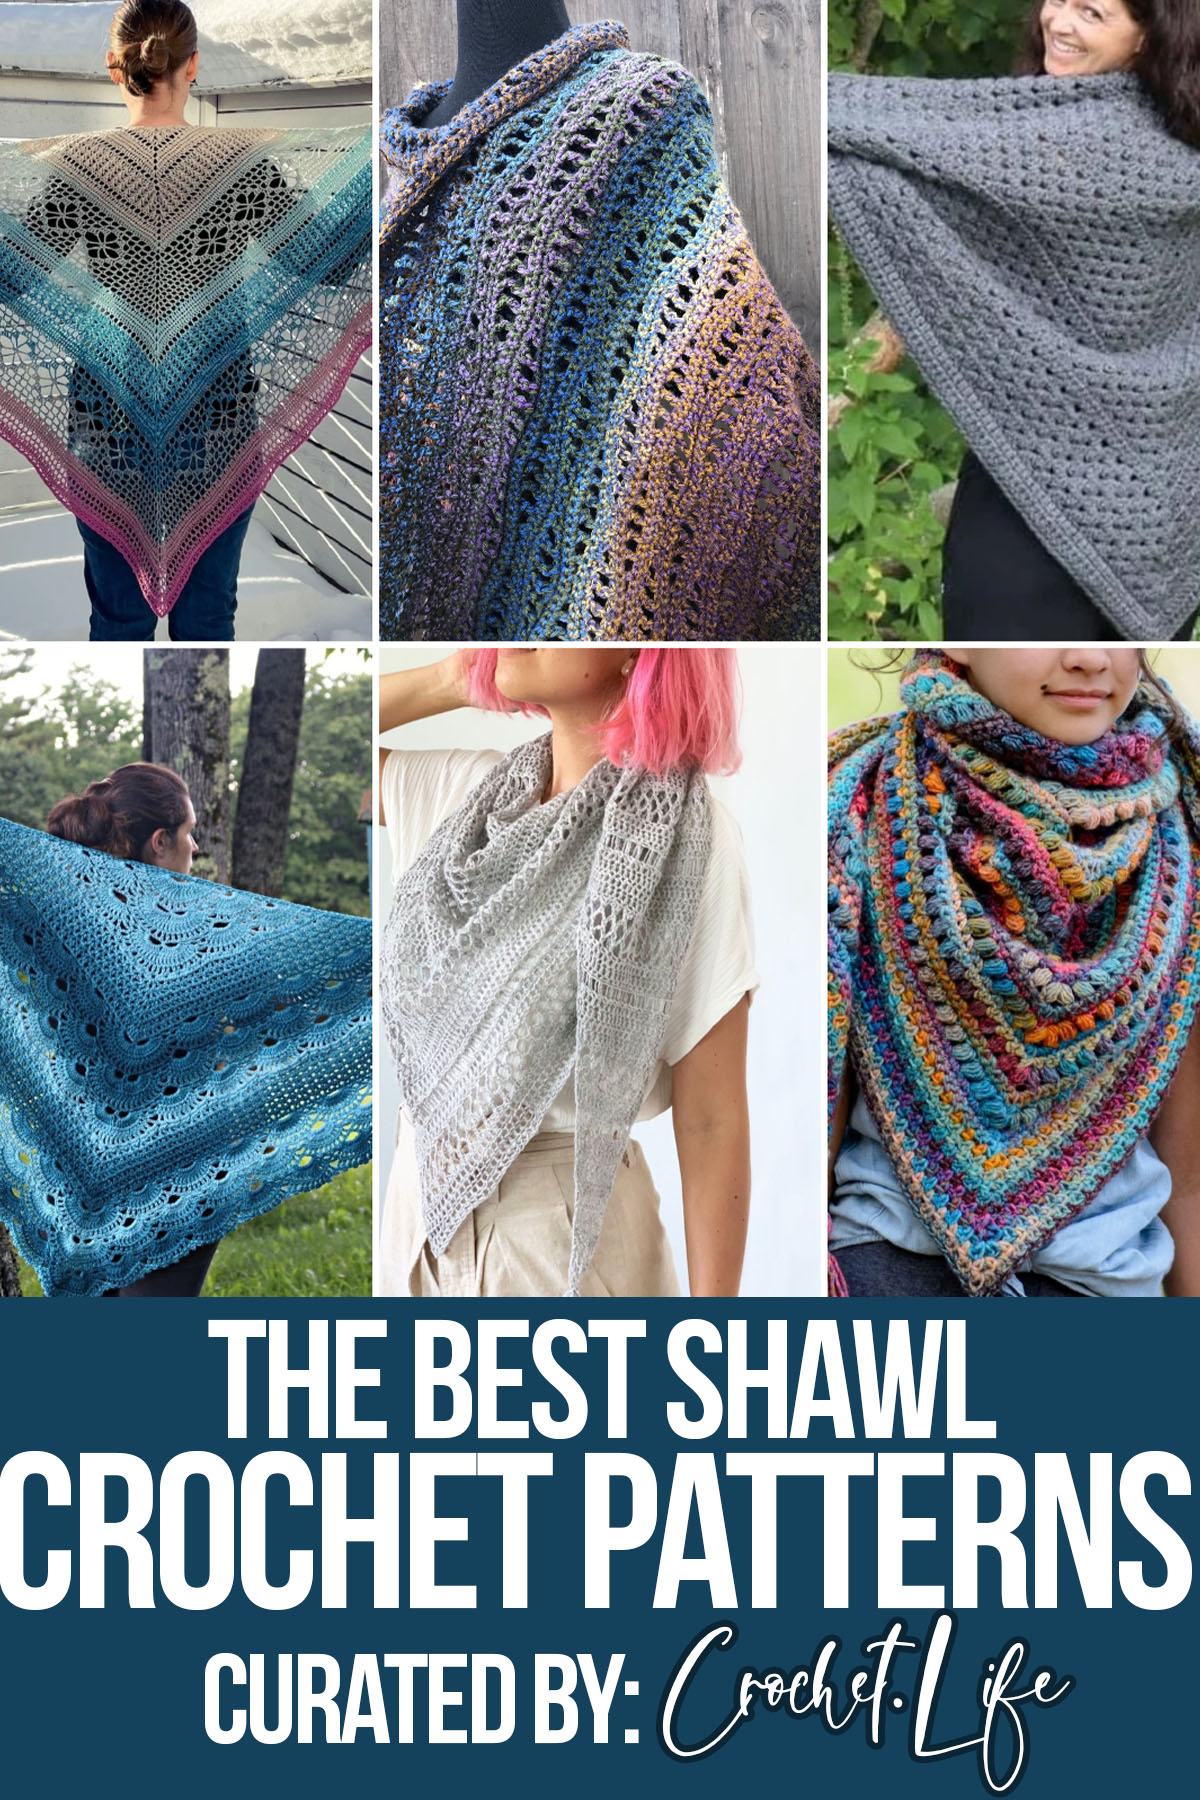 photo collage of crochet patterns for shawls with text which reads the best shawl crochet patterns curated by crochet.life